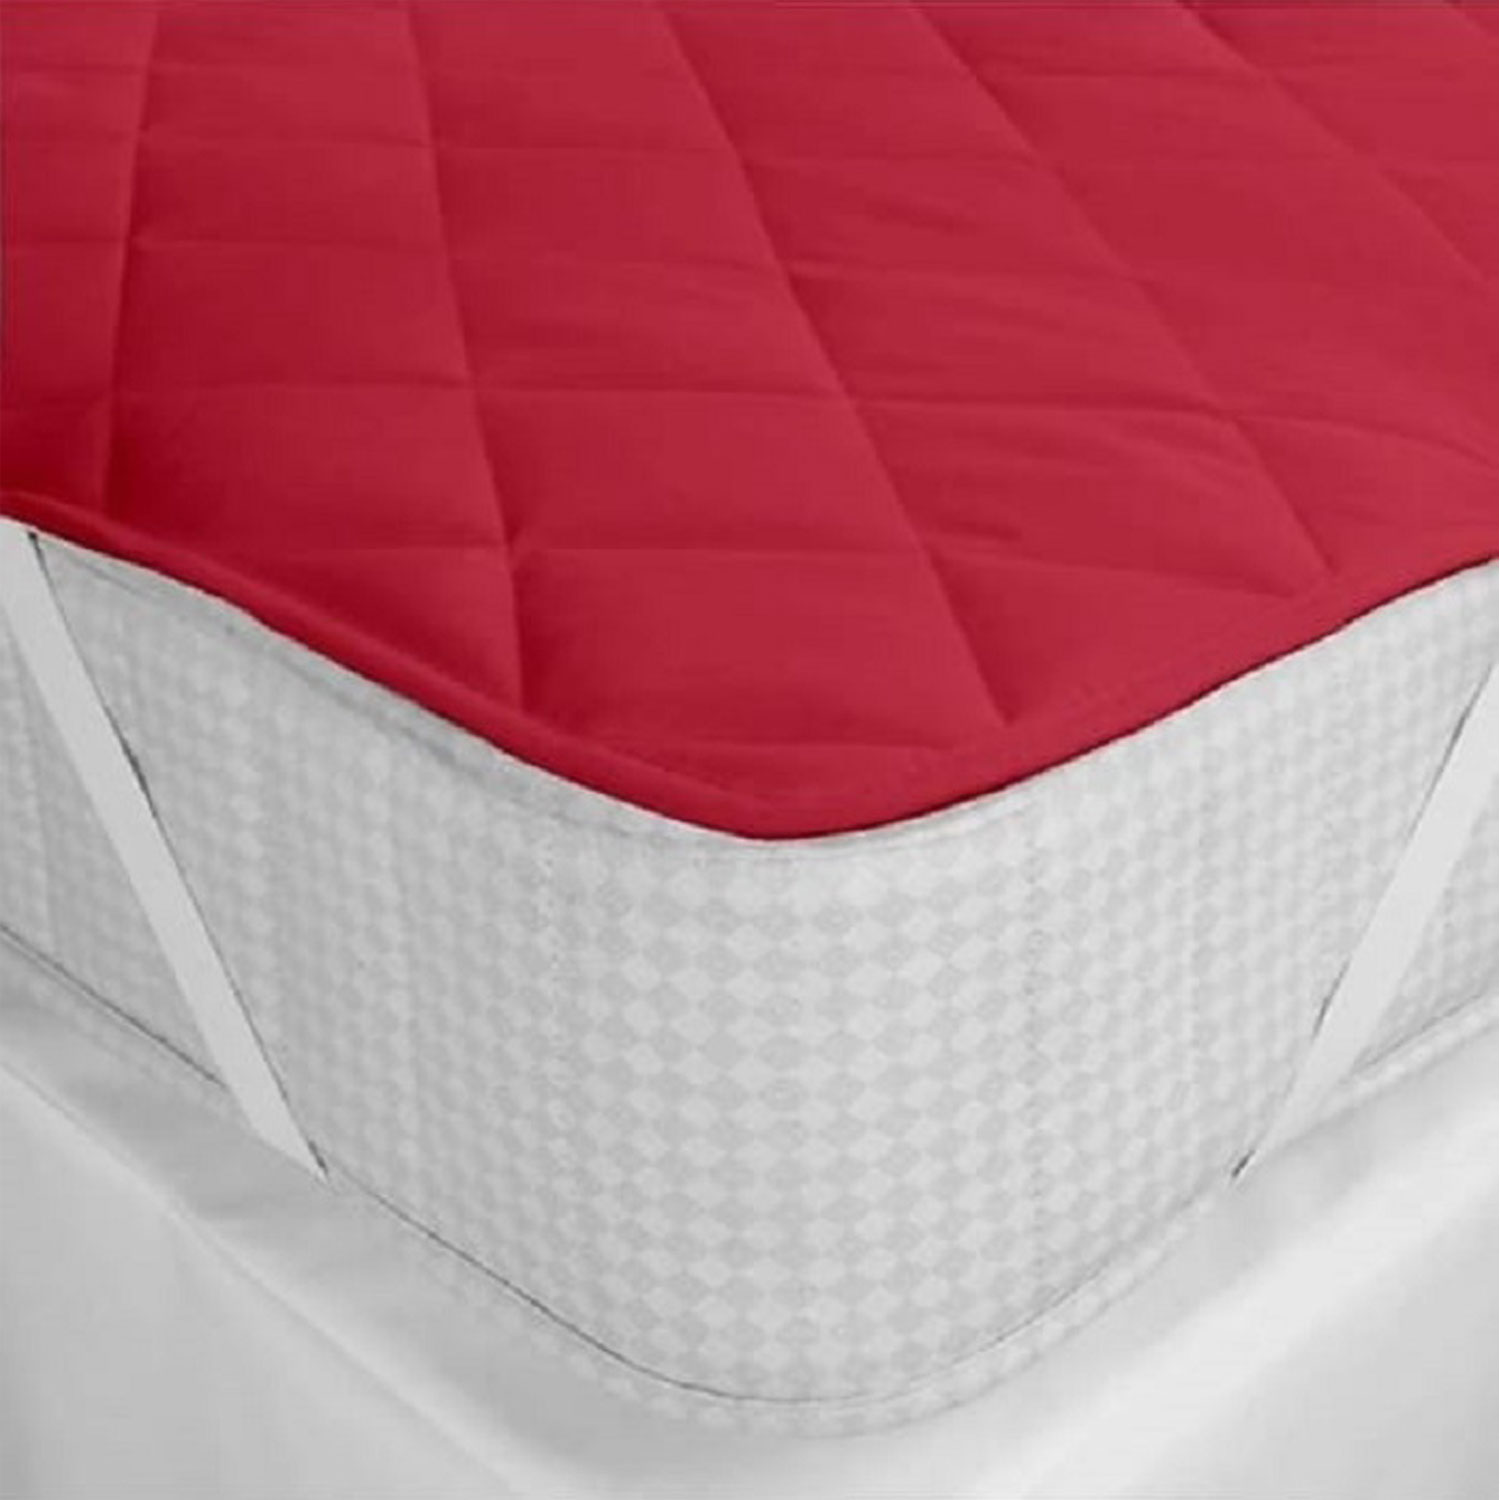 HOMDAZAL  Waterproof And Dustproof Fitted Mattress Protector, Red | Pack of 4